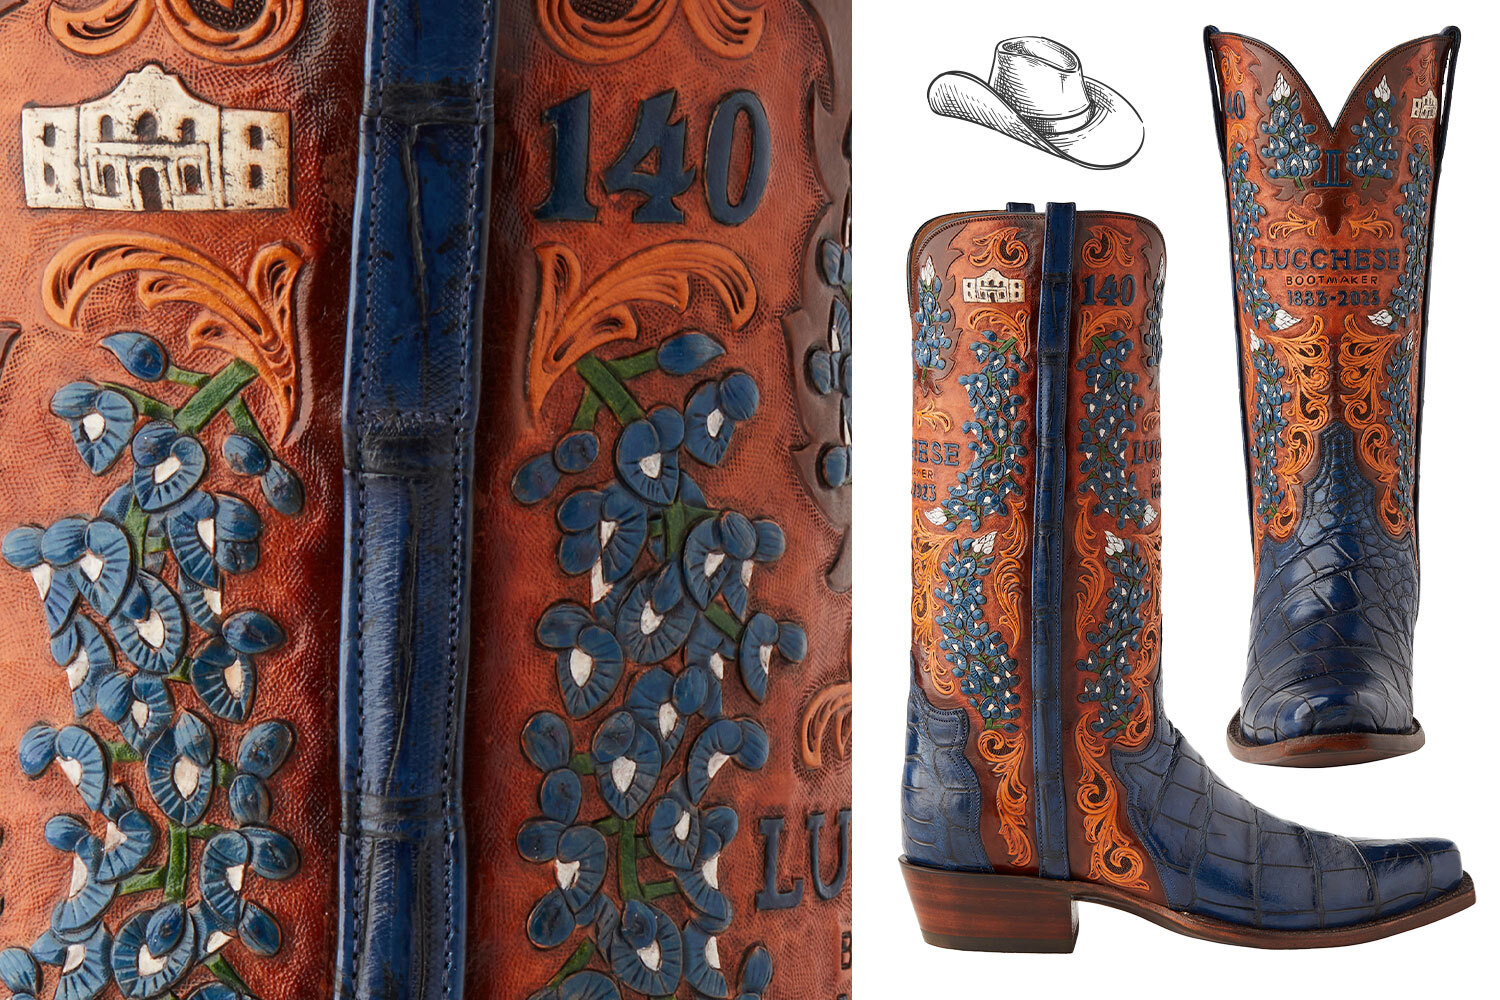 Lucchese's 140th anniversary boot are hand-tooled with bluebonnets, the Texas state flower